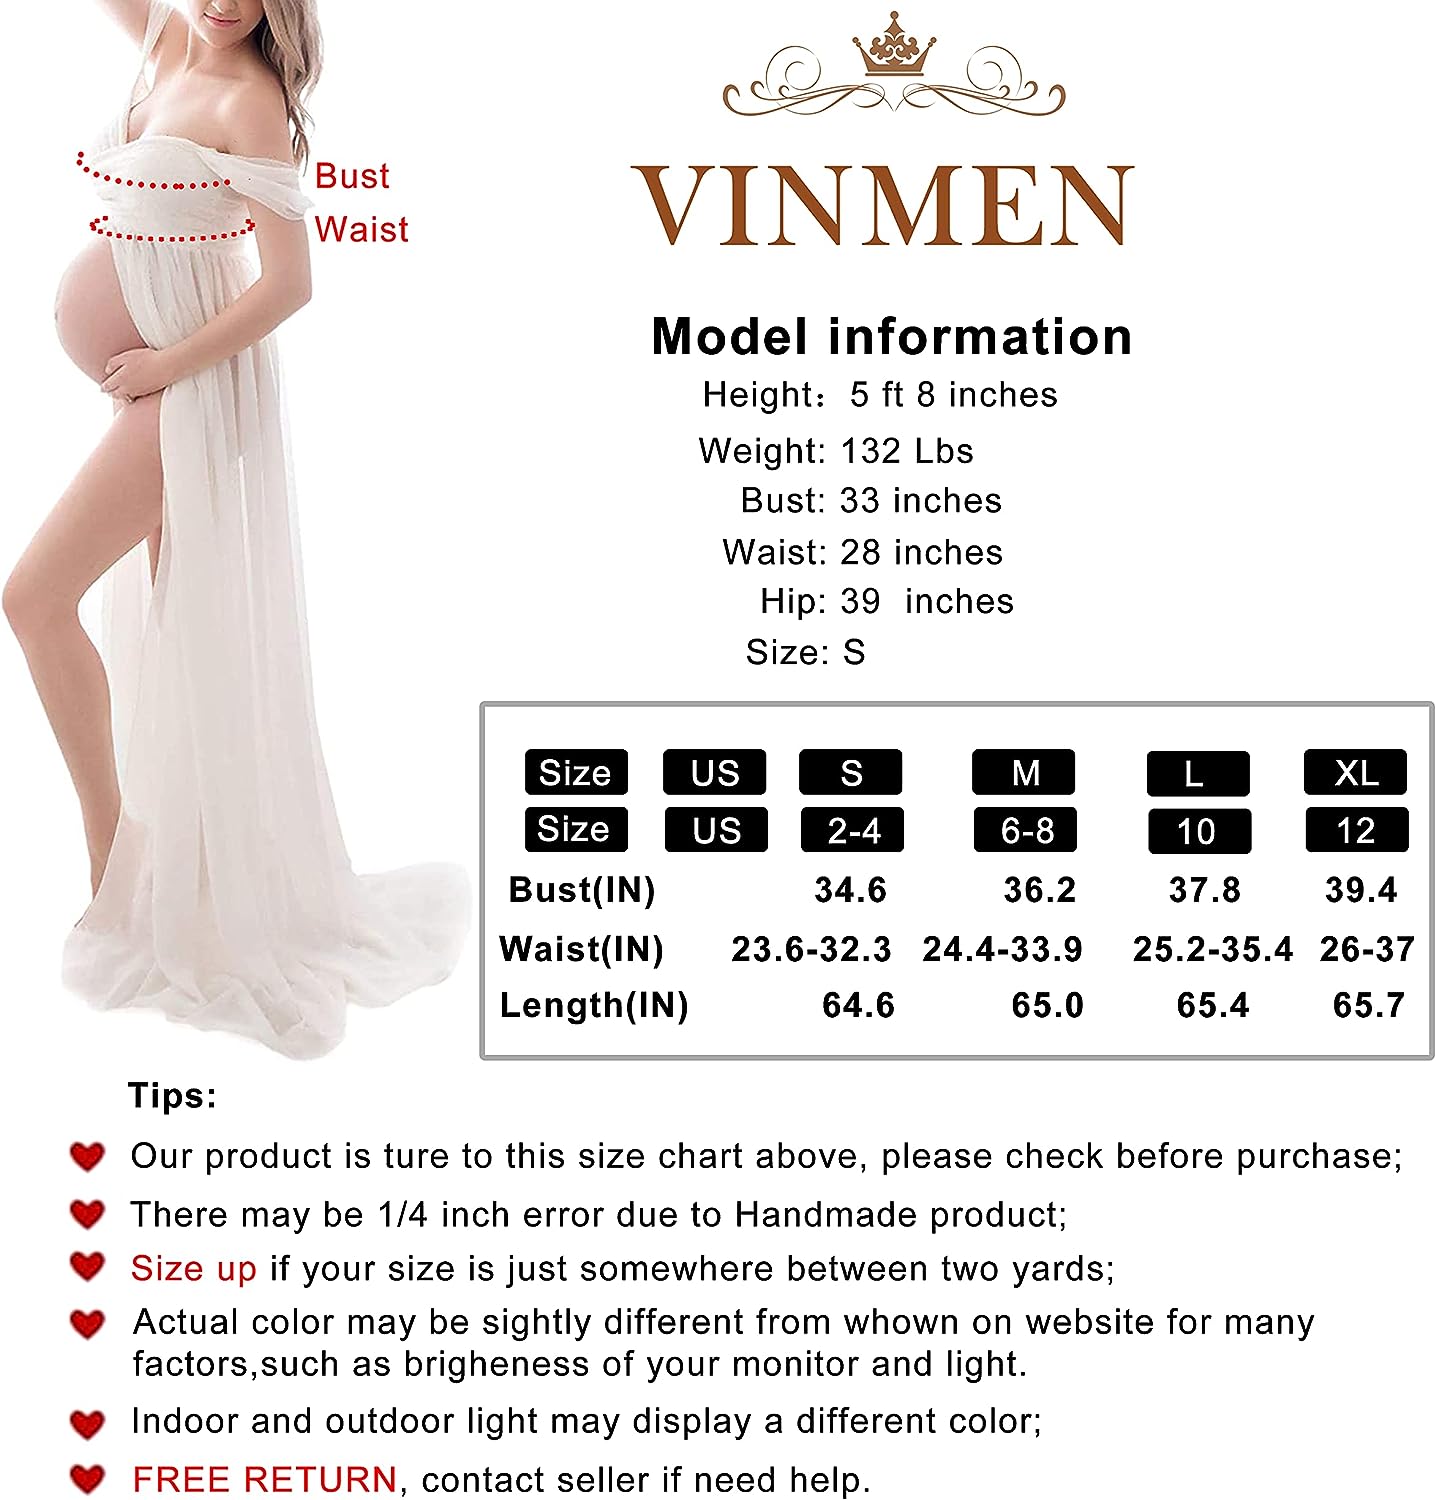 Gvraslvet Women's Chiffon Lace Maternity Dresses for Photoshoot - A Timeless and Elegant Choice